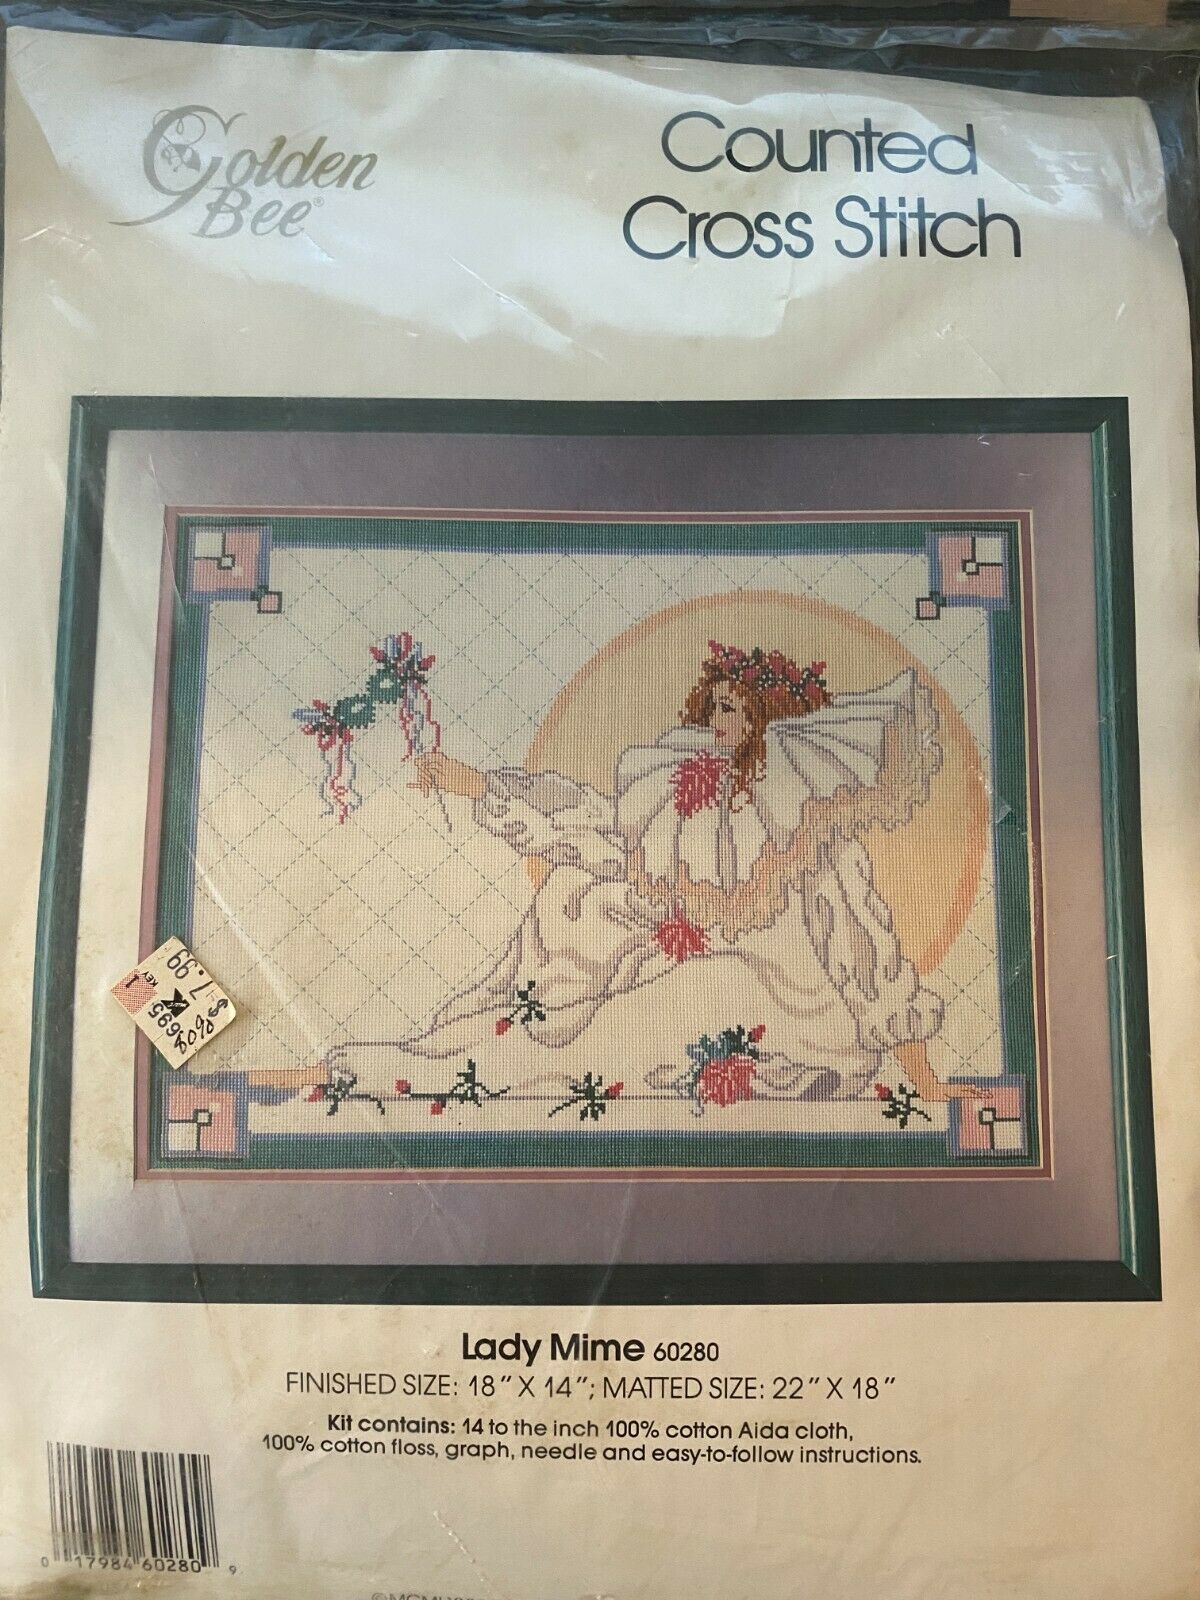 Golden Bee Counted Cross Stitch Kit LADY MIME 18" x 14" #60280 - $9.00